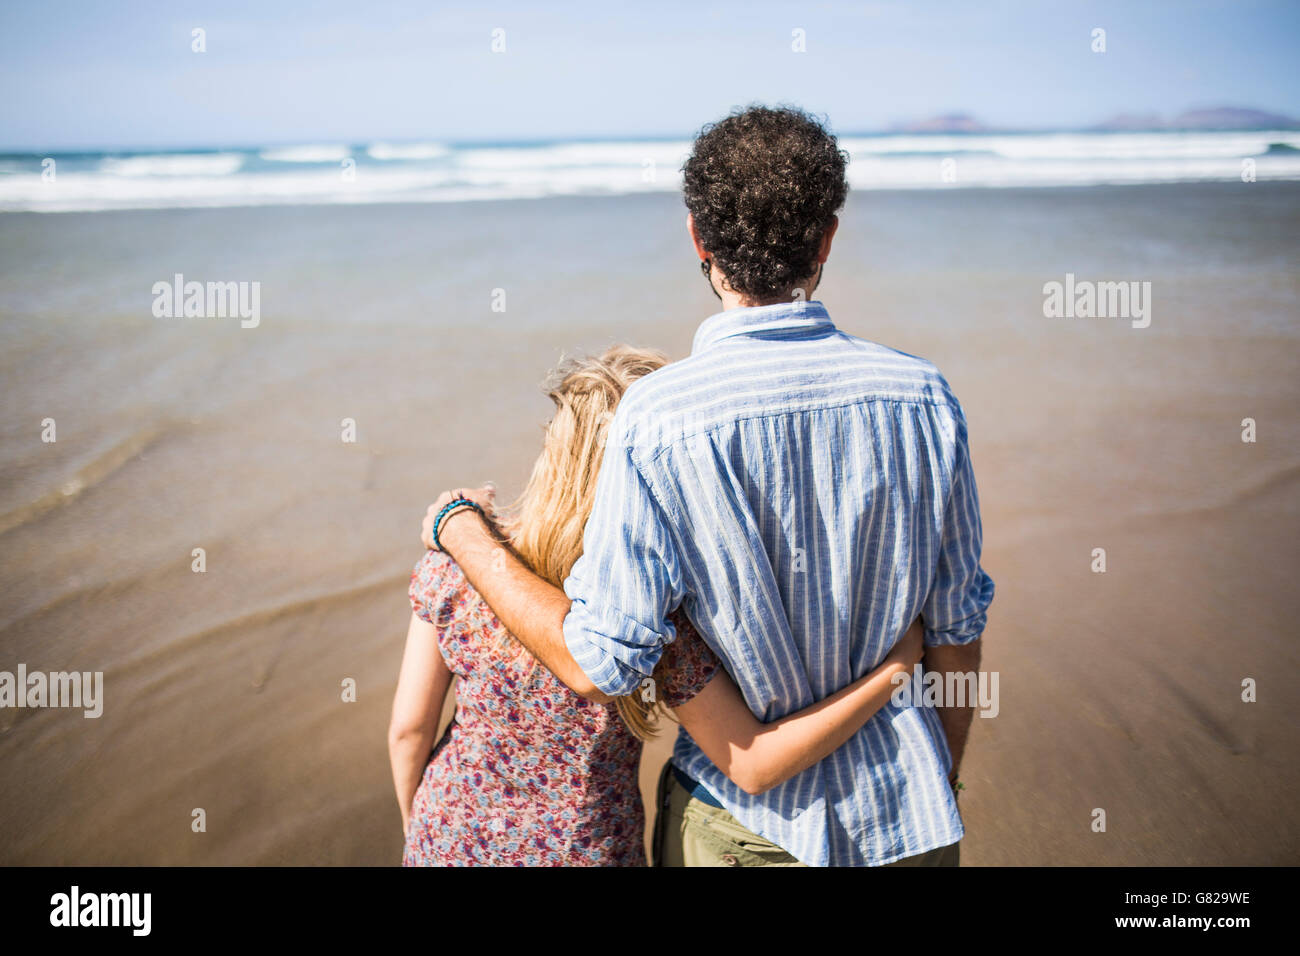 Rear view of loving couple standing arm around at beach Stock Photo